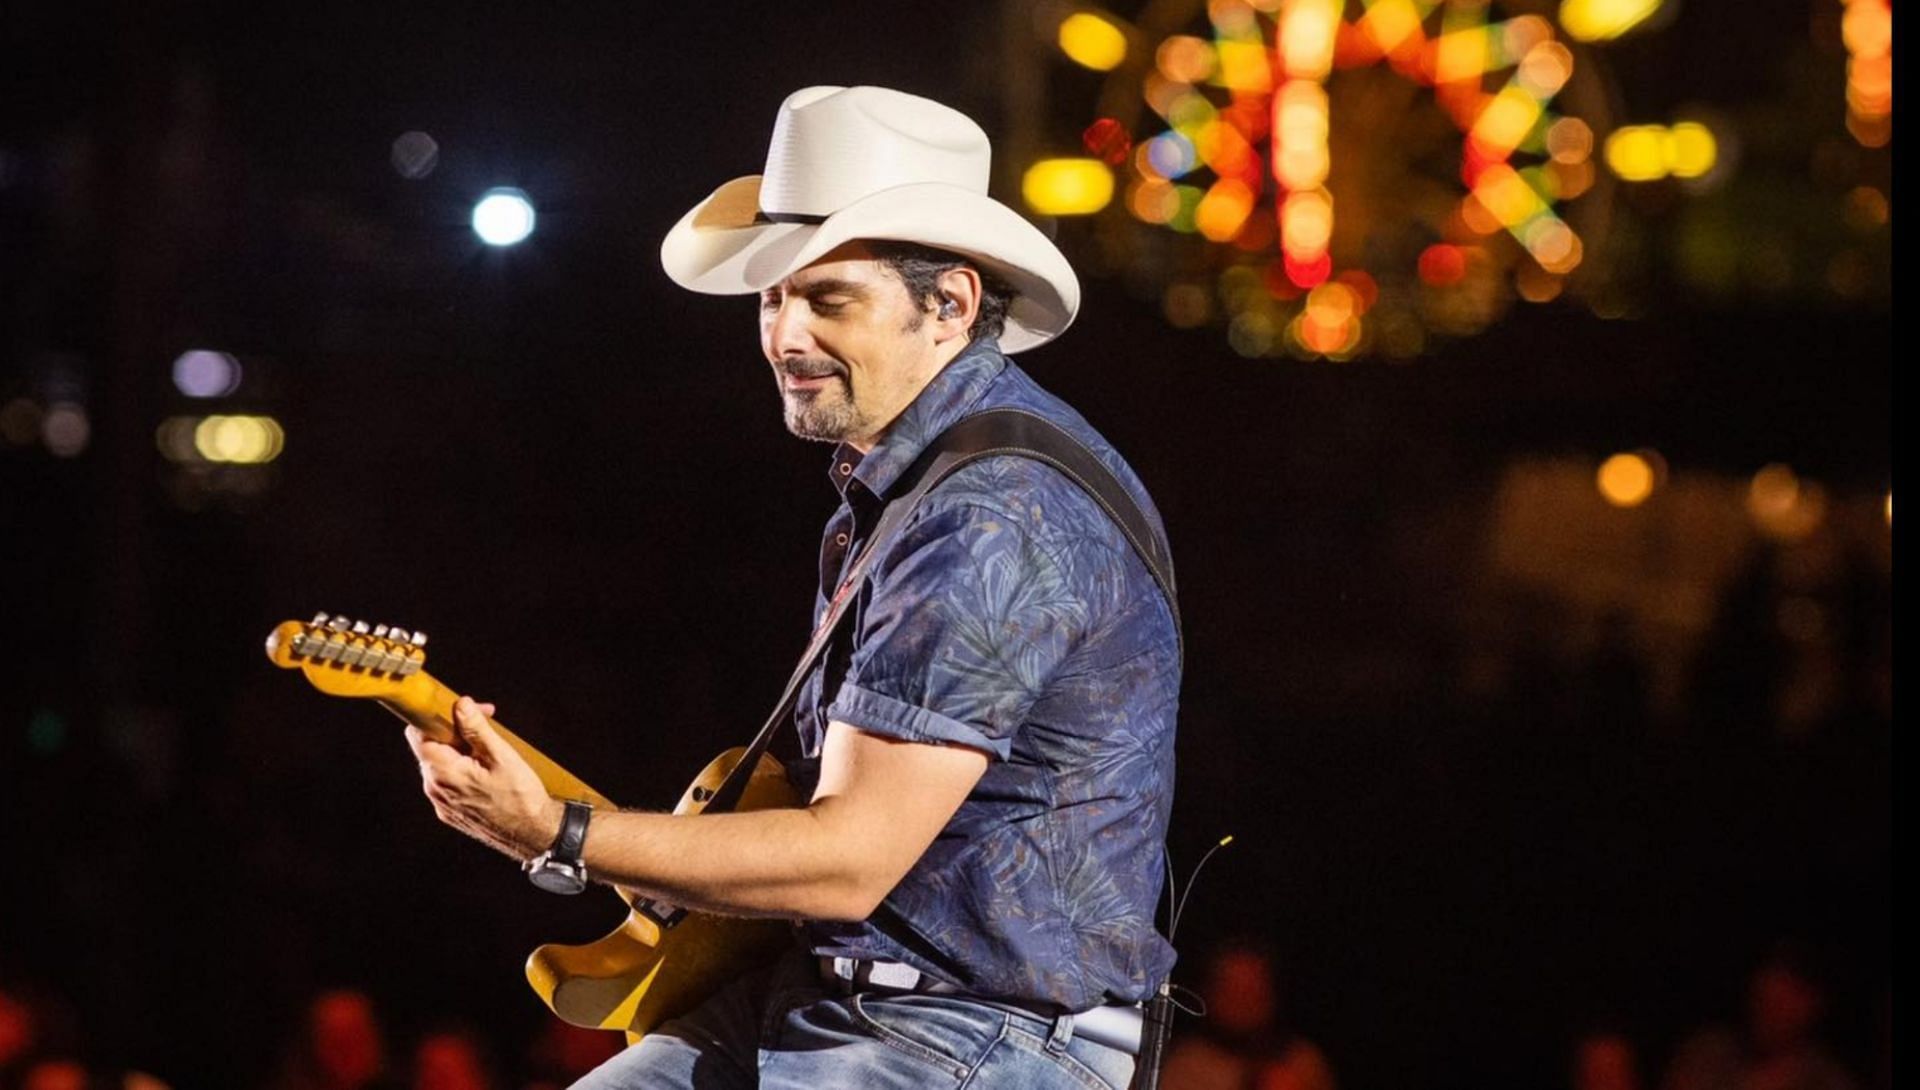 American country music singer and songwriter Brad Paisley has announced a world tour, which will begin on May 27. (Image via Facebook / Brad Paisley)